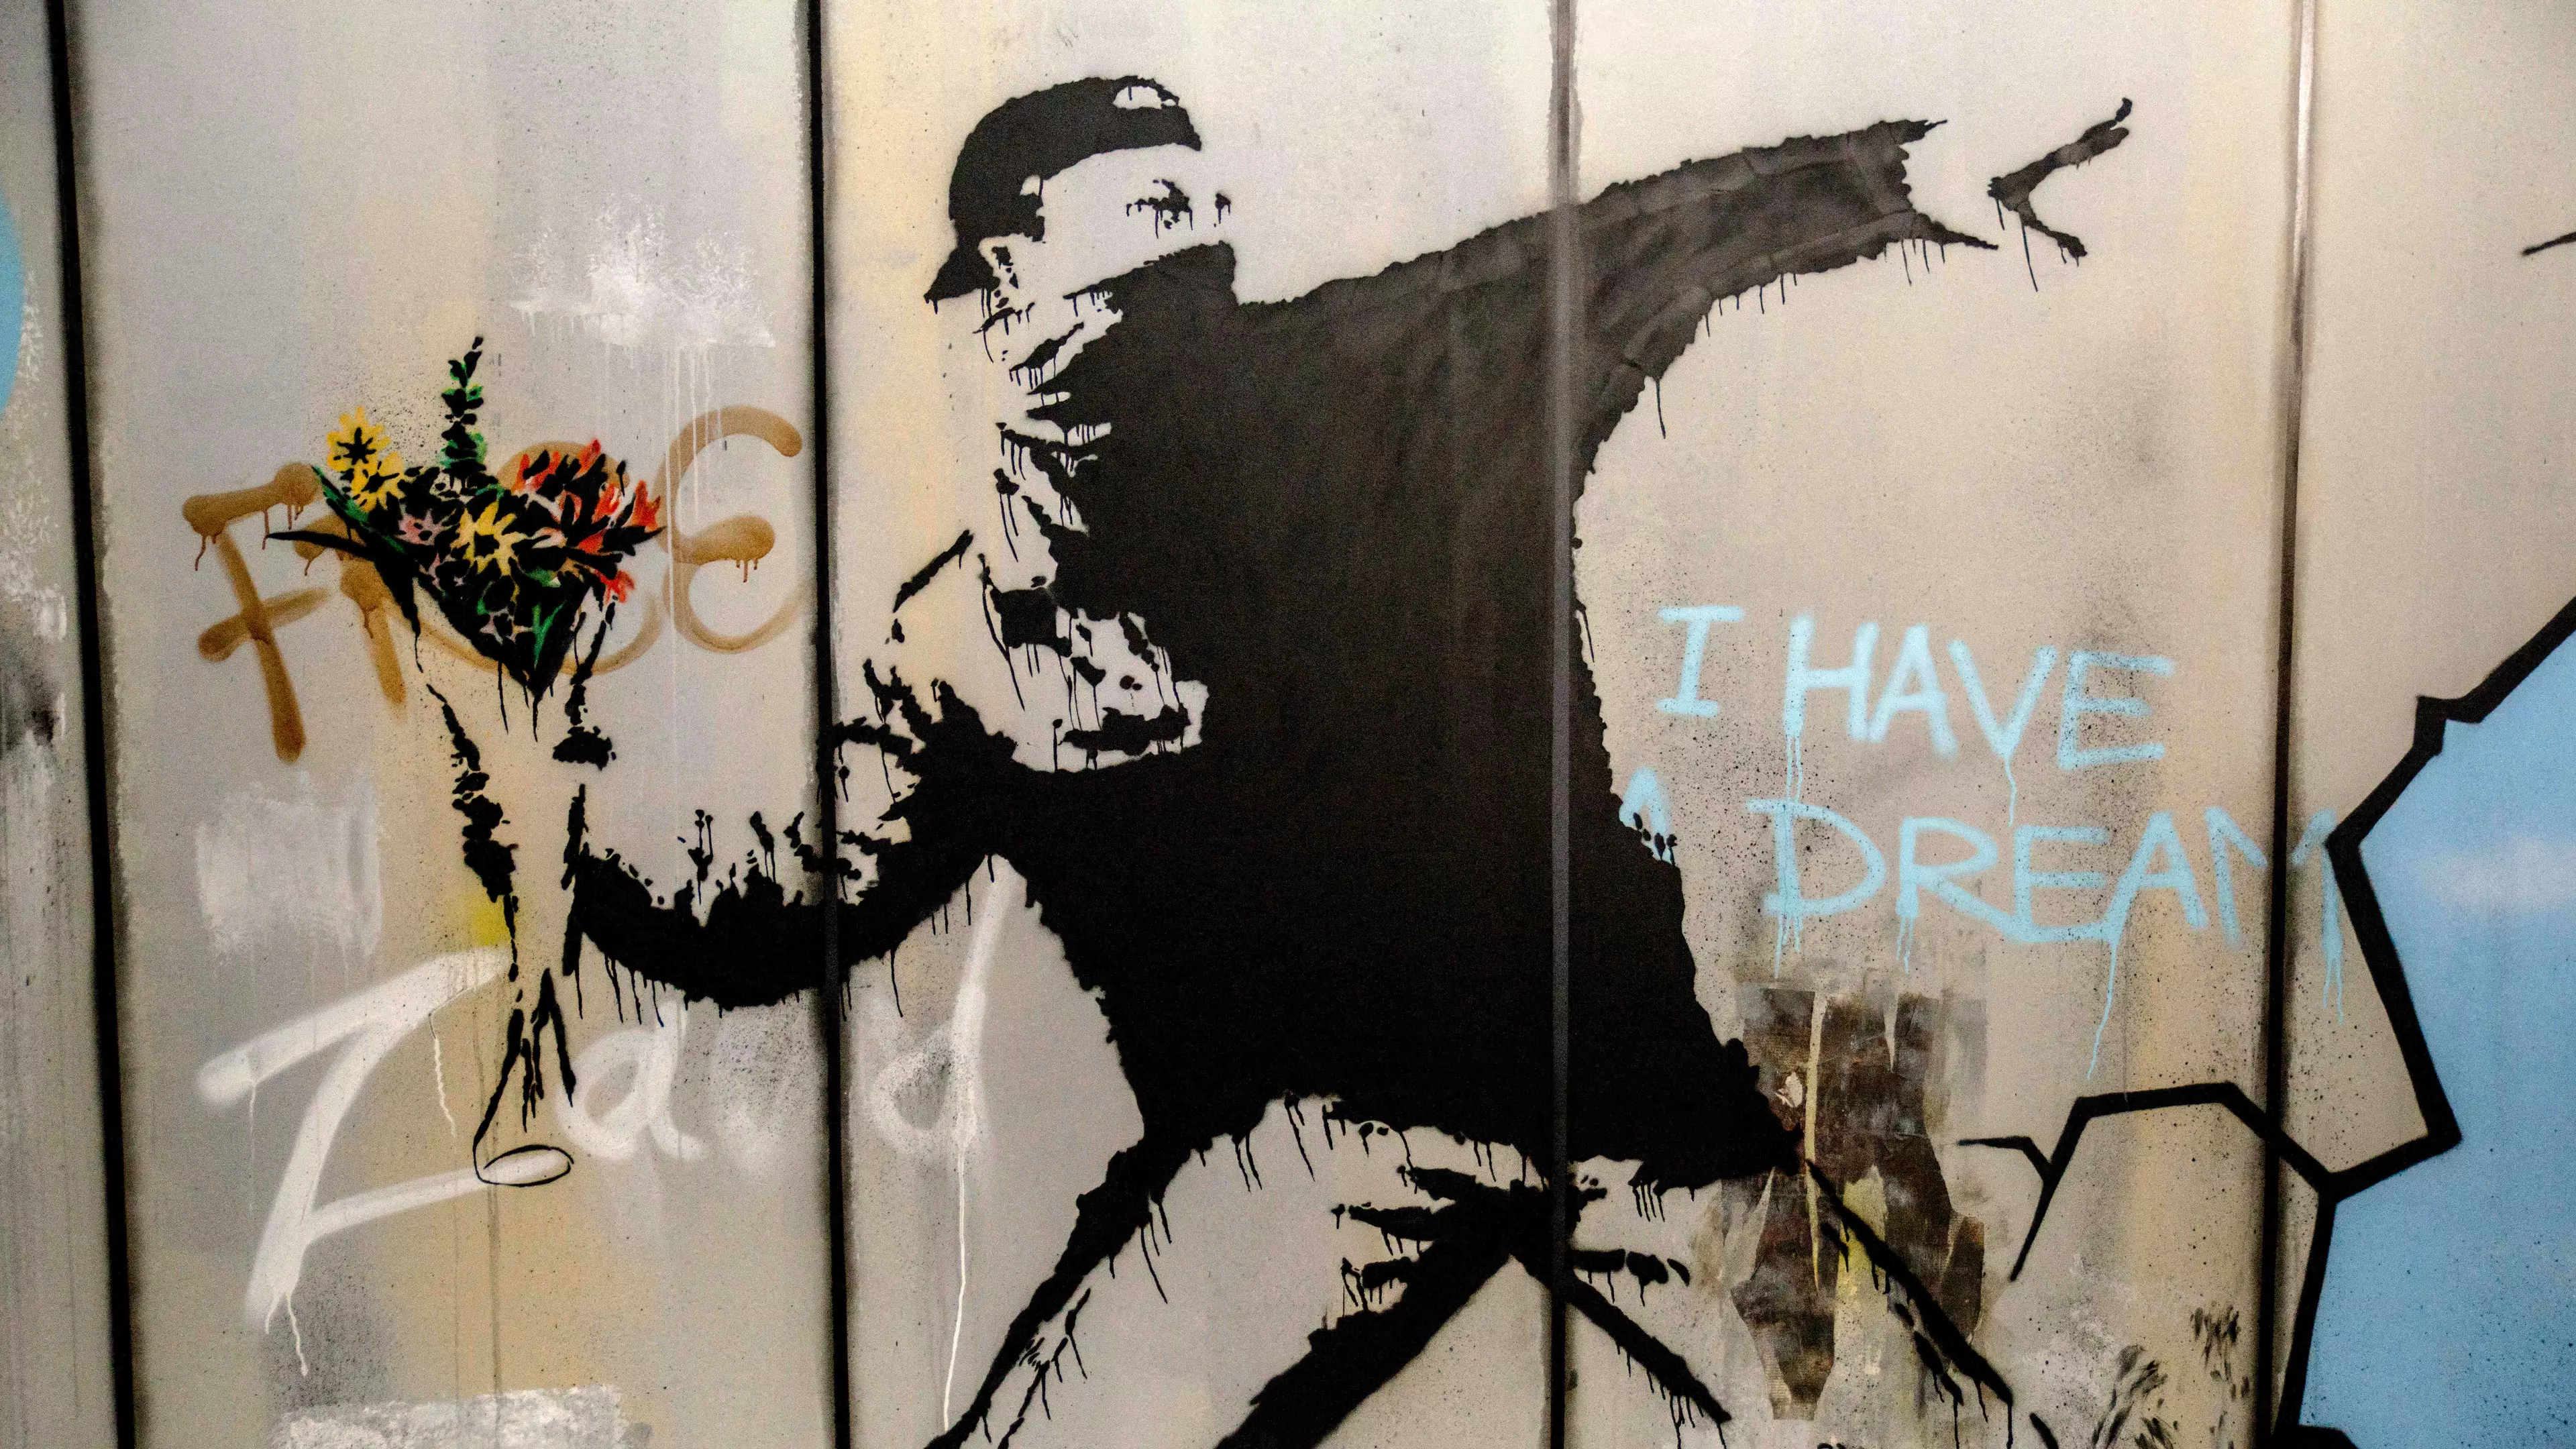 Exhibition Containing Banksy's Best Work Is Coming To Australia